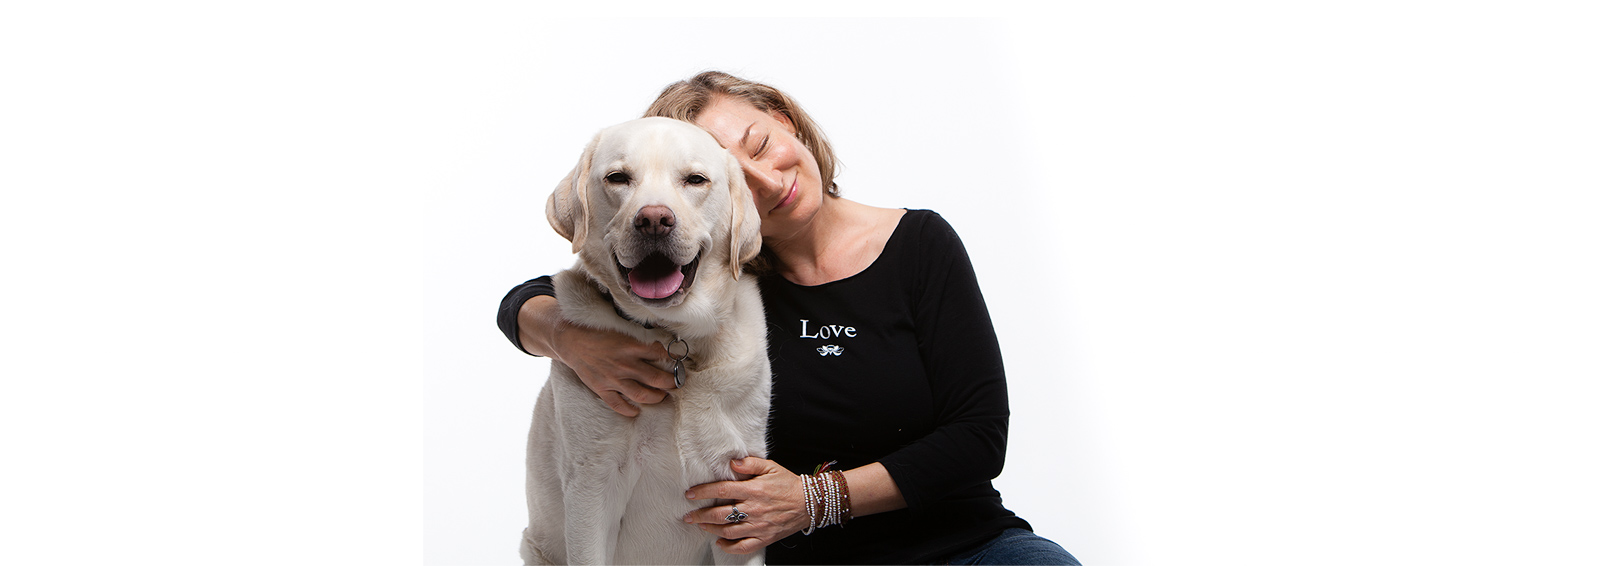 Positivity Designs Founder wearing Love T-shirt and hugging dog